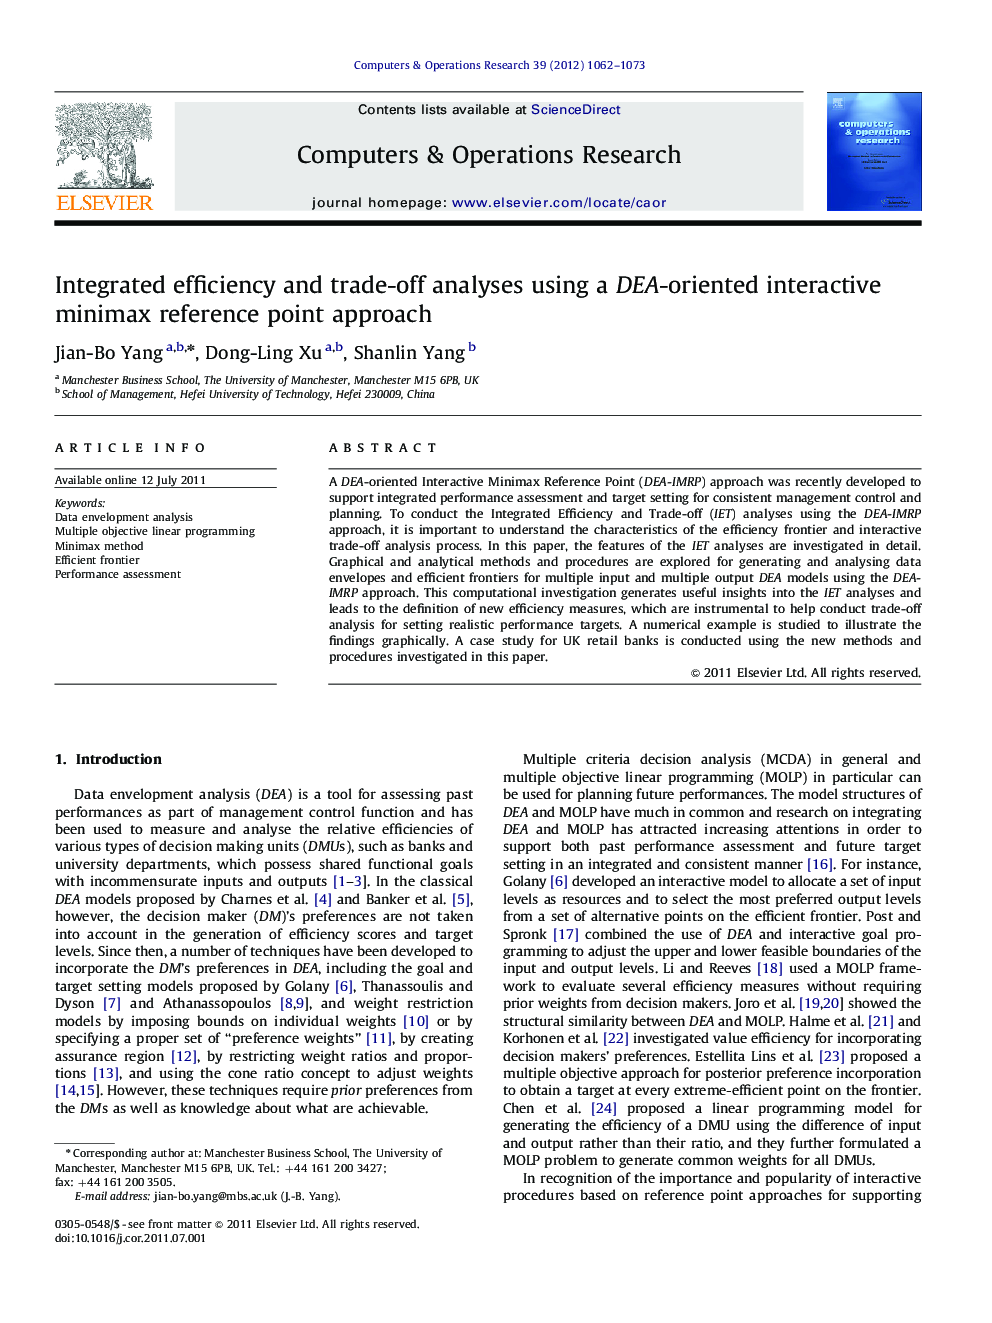 Integrated efficiency and trade-off analyses using a DEA-oriented interactive minimax reference point approach